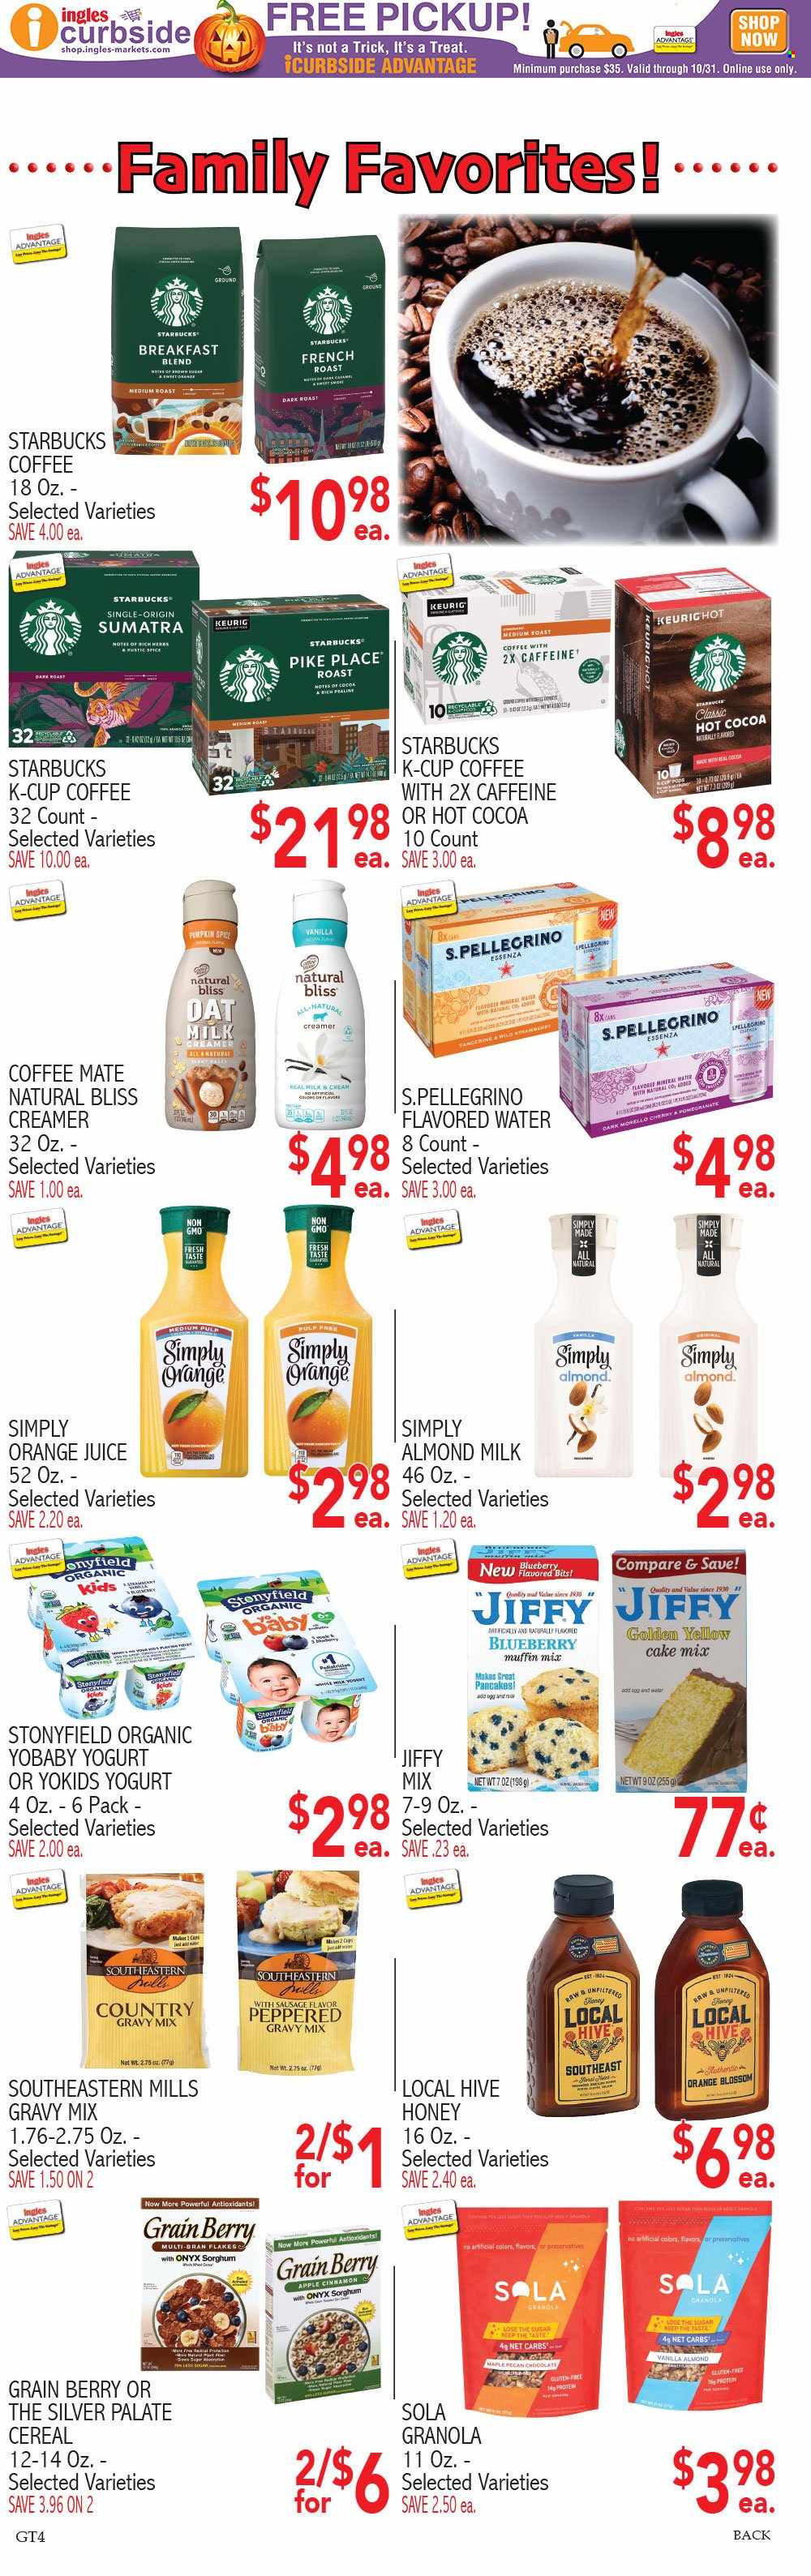 thumbnail - Ingles Flyer - 09/28/2022 - 10/04/2022 - Sales products - cake mix, muffin mix, pancakes, sausage, yoghurt, almond milk, Coffee-Mate, milk, Blossom, creamer, chocolate, cereals, granola, bran flakes, gravy mix, spice, herbs, cinnamon, honey, orange juice, juice, mineral water, flavored water, San Pellegrino, hot cocoa, Starbucks, coffee capsules, K-Cups, Keurig, breakfast blend, pomegranate. Page 8.